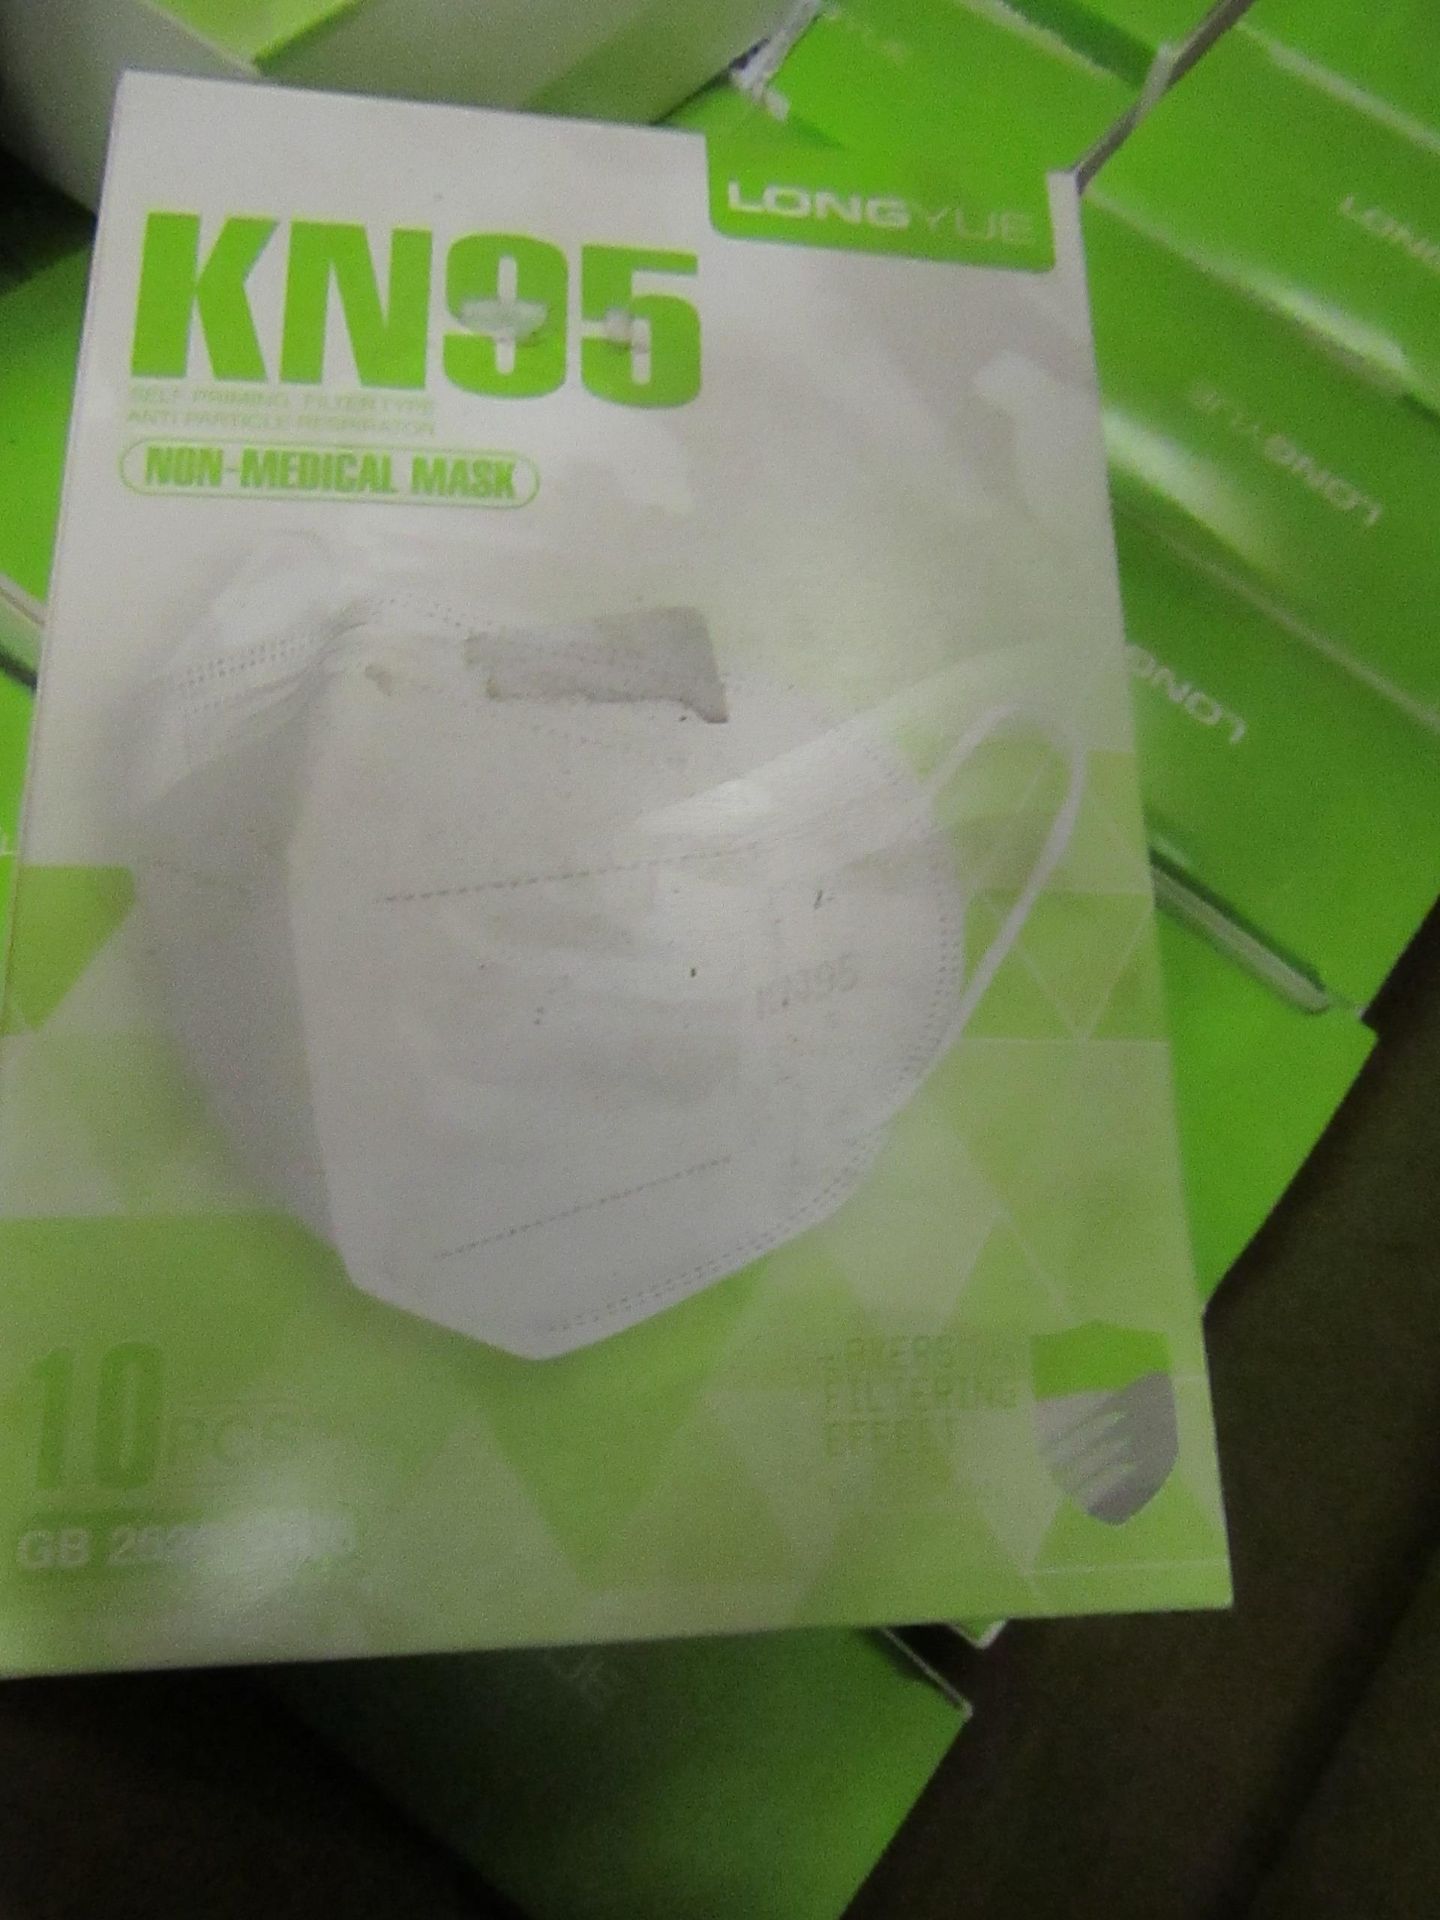 10 x KN95 Non-Medical Masks new & packaged see image